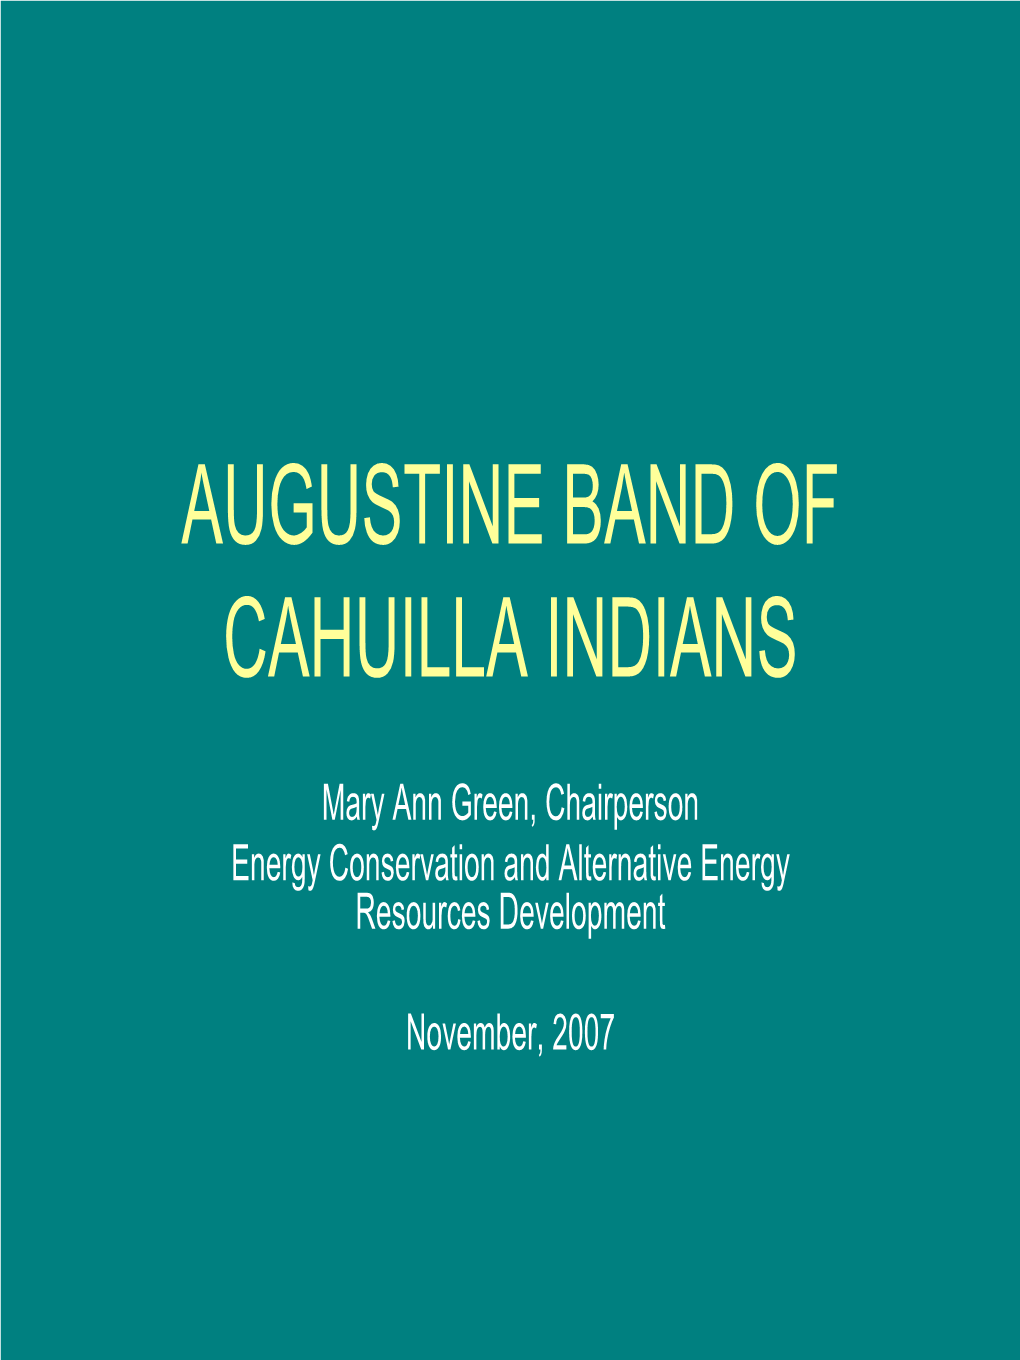 Augustine Band of Cahuilla Mission Indians